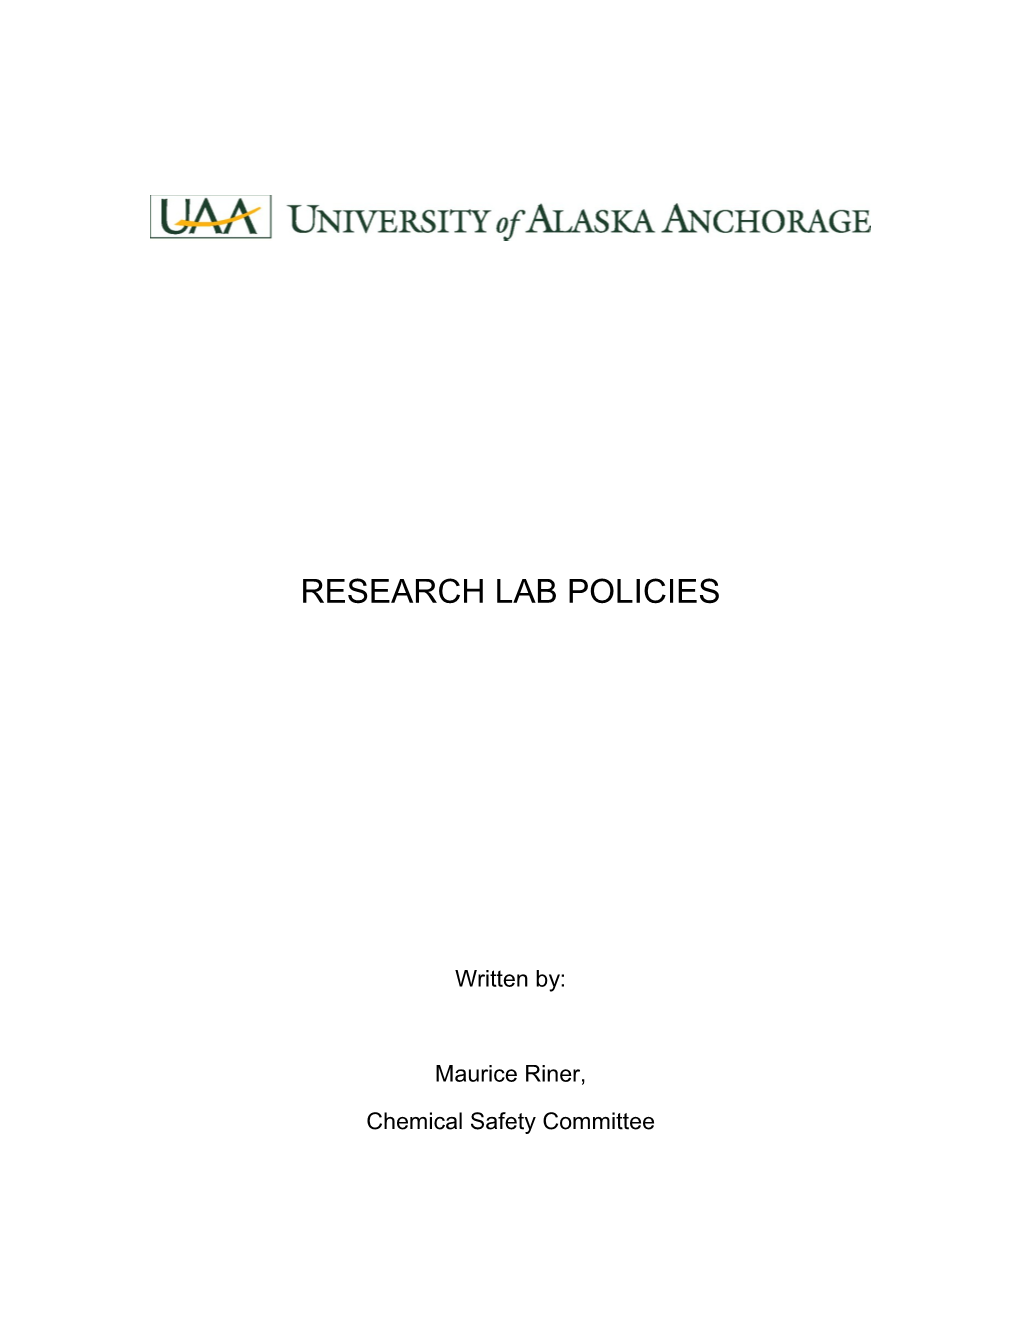 Research Lab Policies